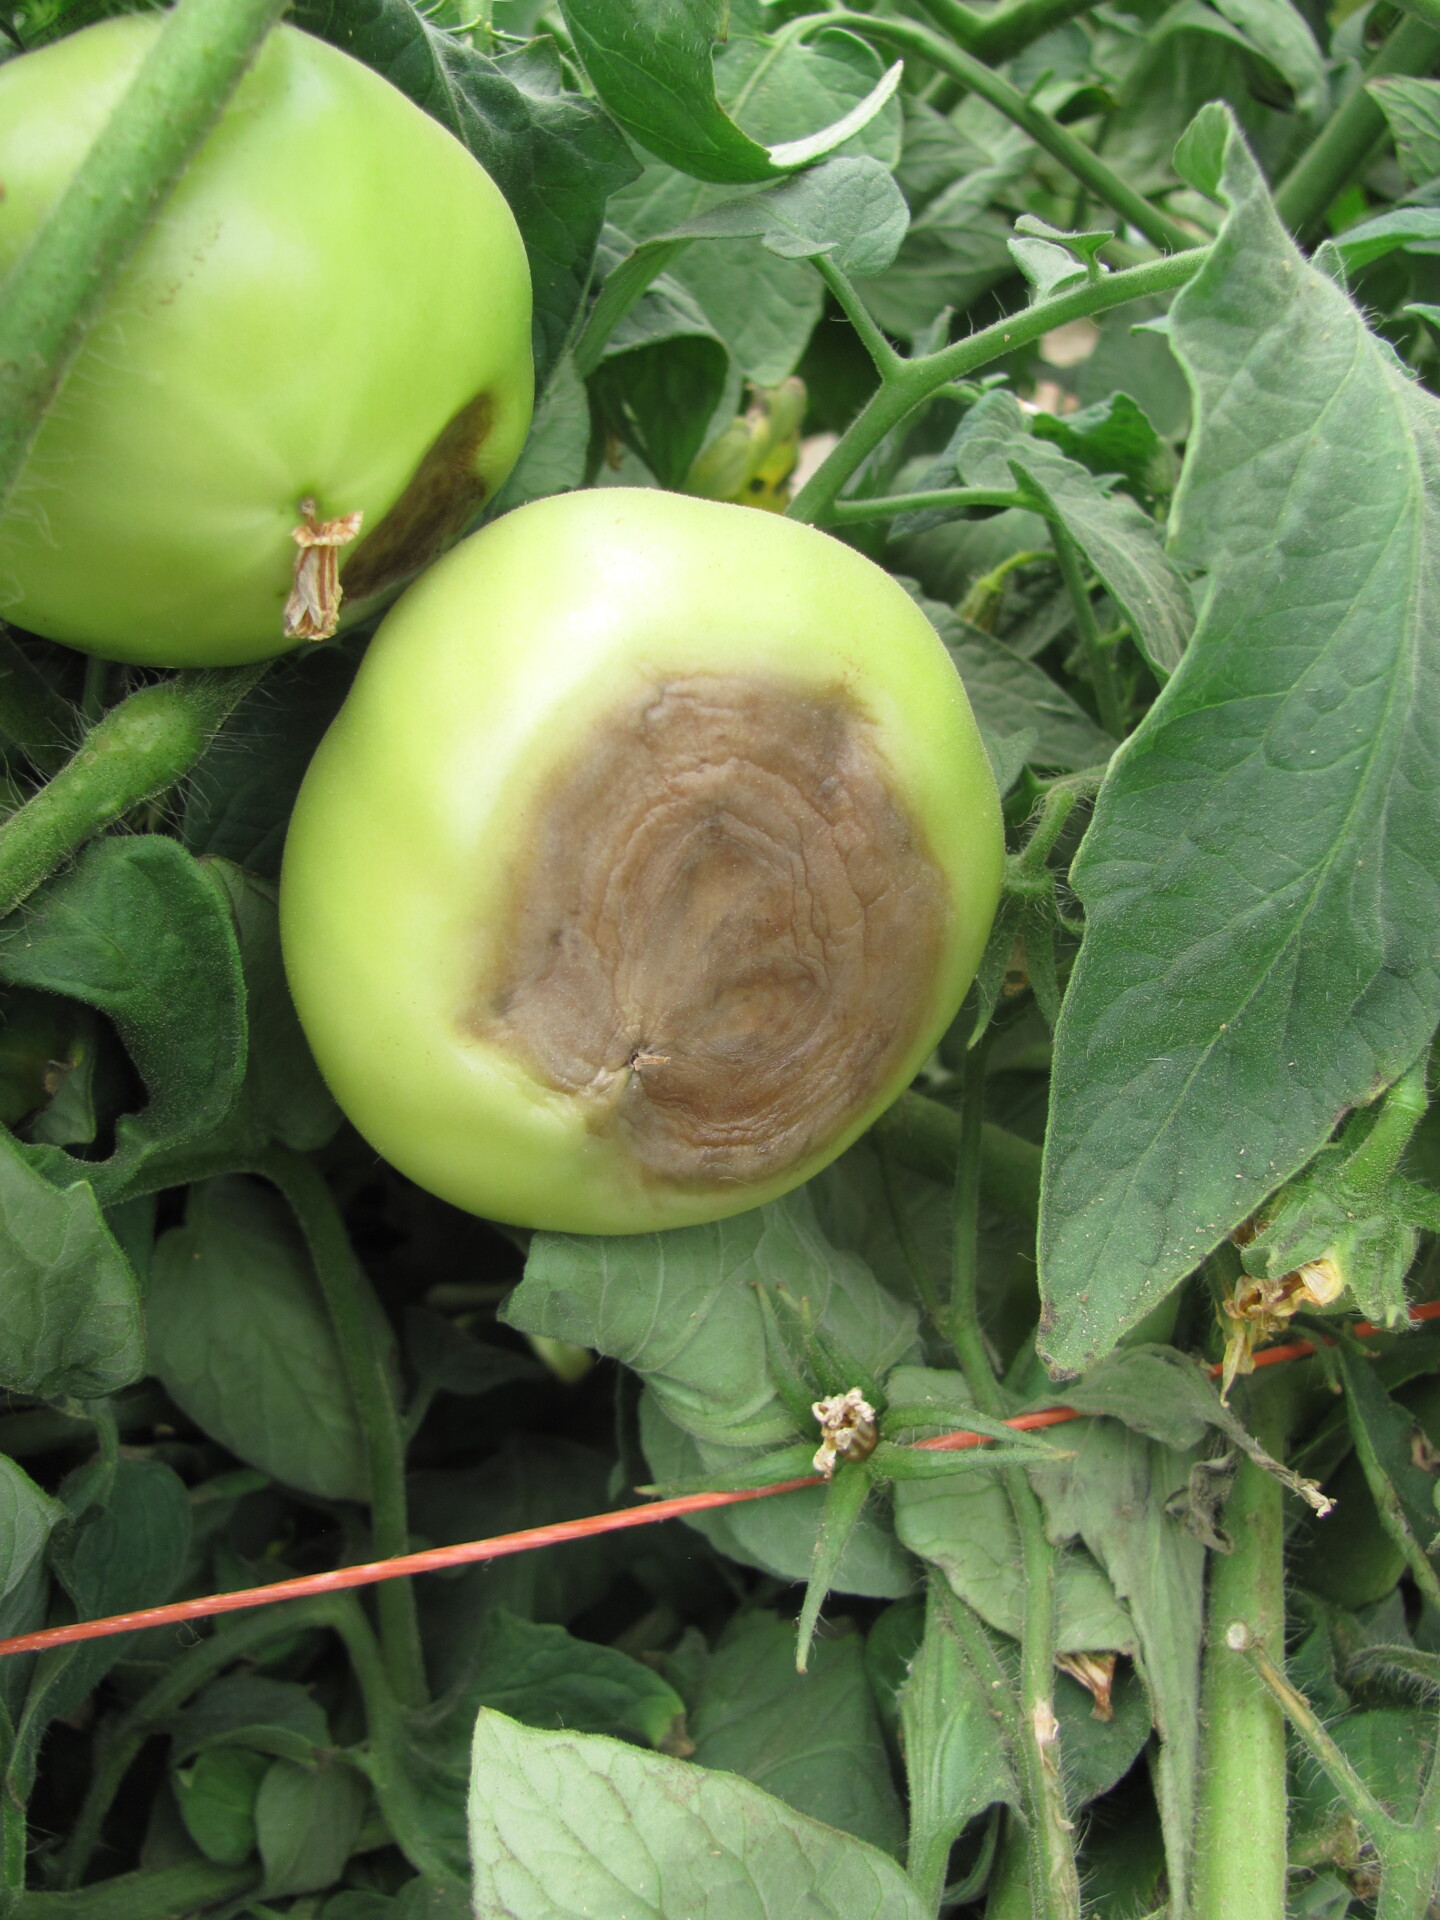 Blossom end rot of tomato can be recognized by a often leathery brown lesion at the base of the tomato.